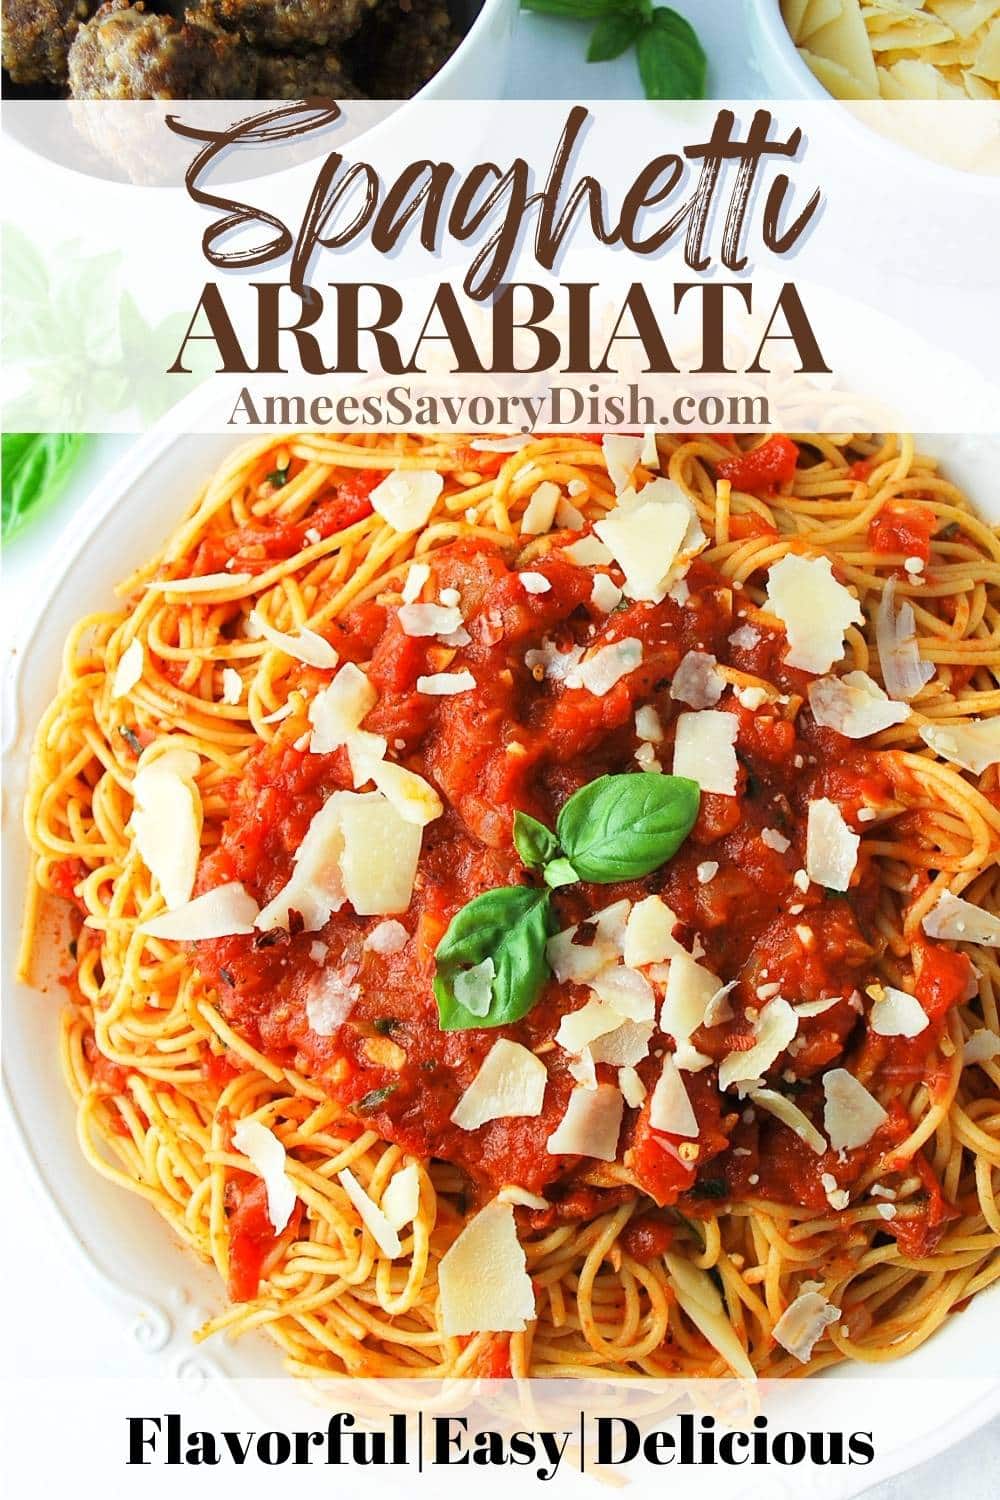 This EASY Spaghetti Arrabbiata recipe makes a zesty red sauce from scratch with San Marzano tomatoes, fresh garlic, and red pepper flakes to toss with hot spaghetti. via @Ameessavorydish